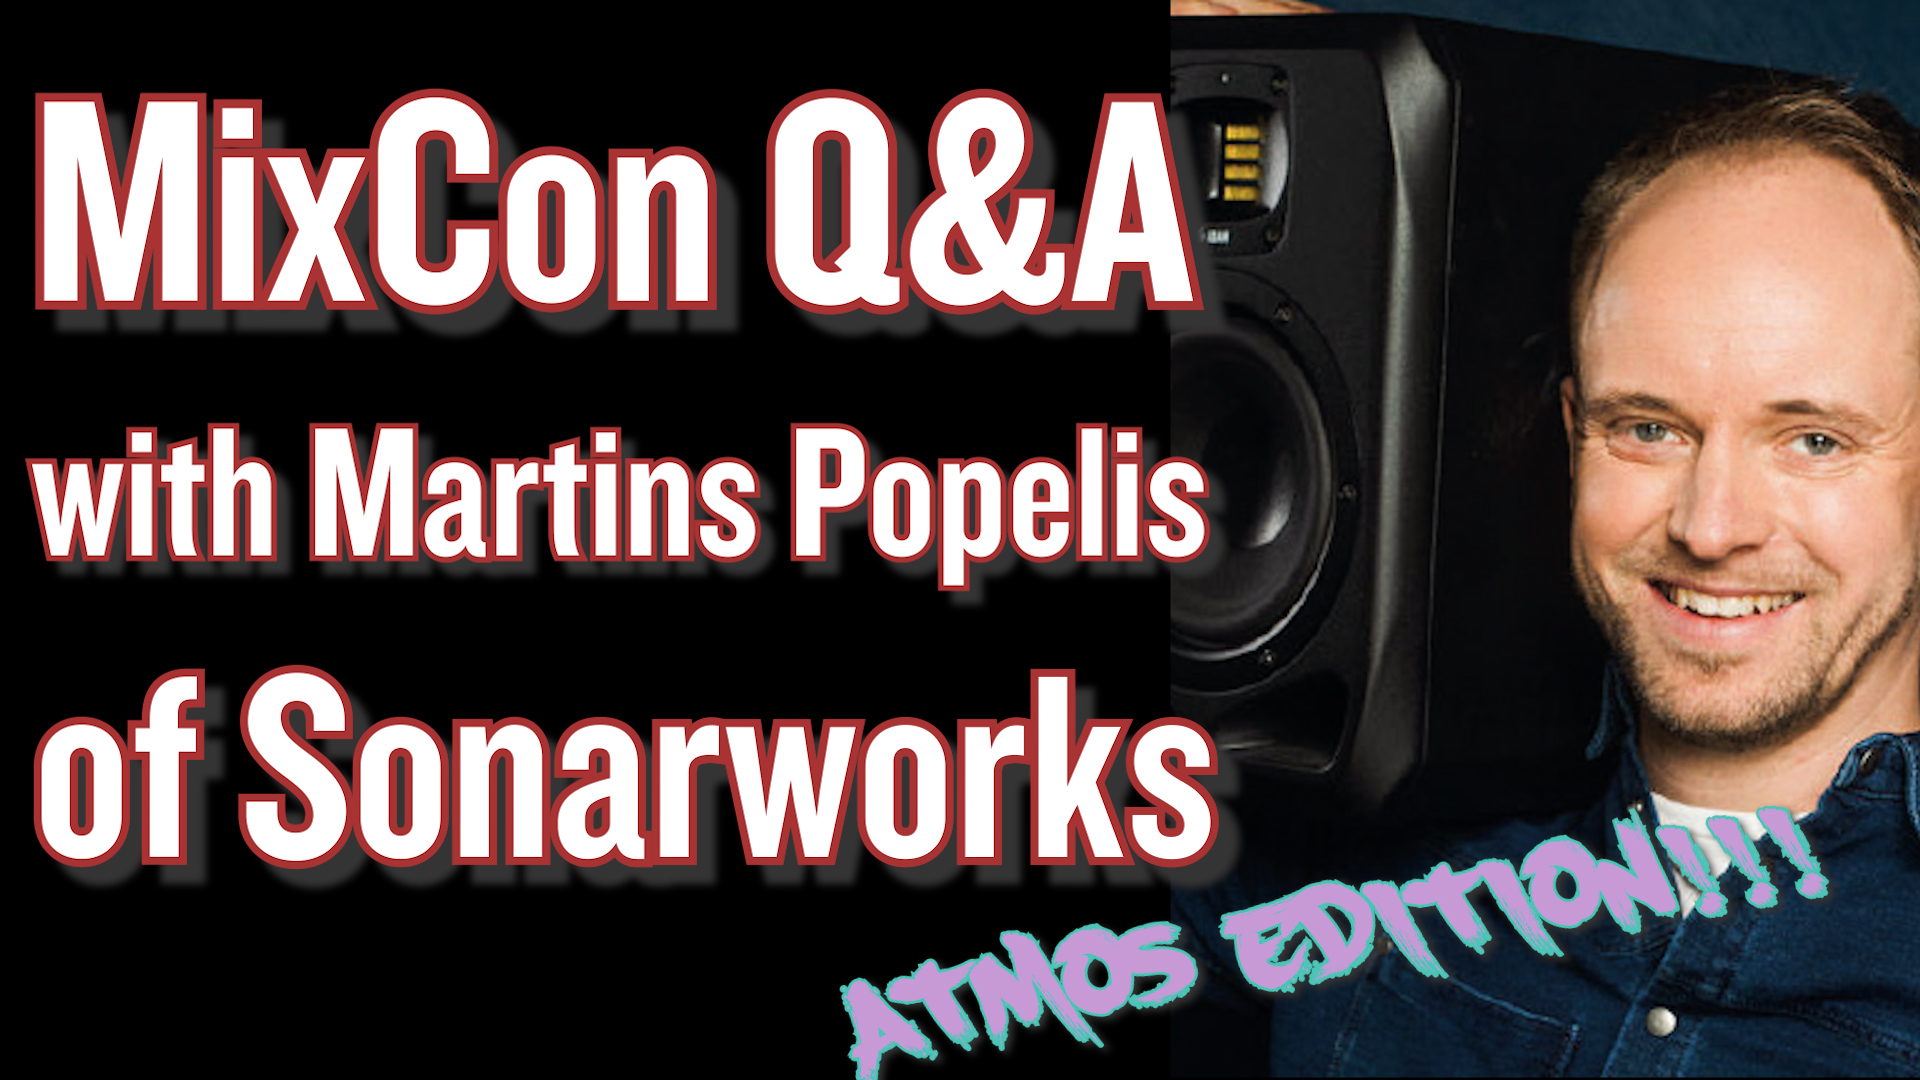 Live Q&A at 3ET: Improve Your Monitoring in Stereo and Atmos (with Martins Popelis of Sonarworks)